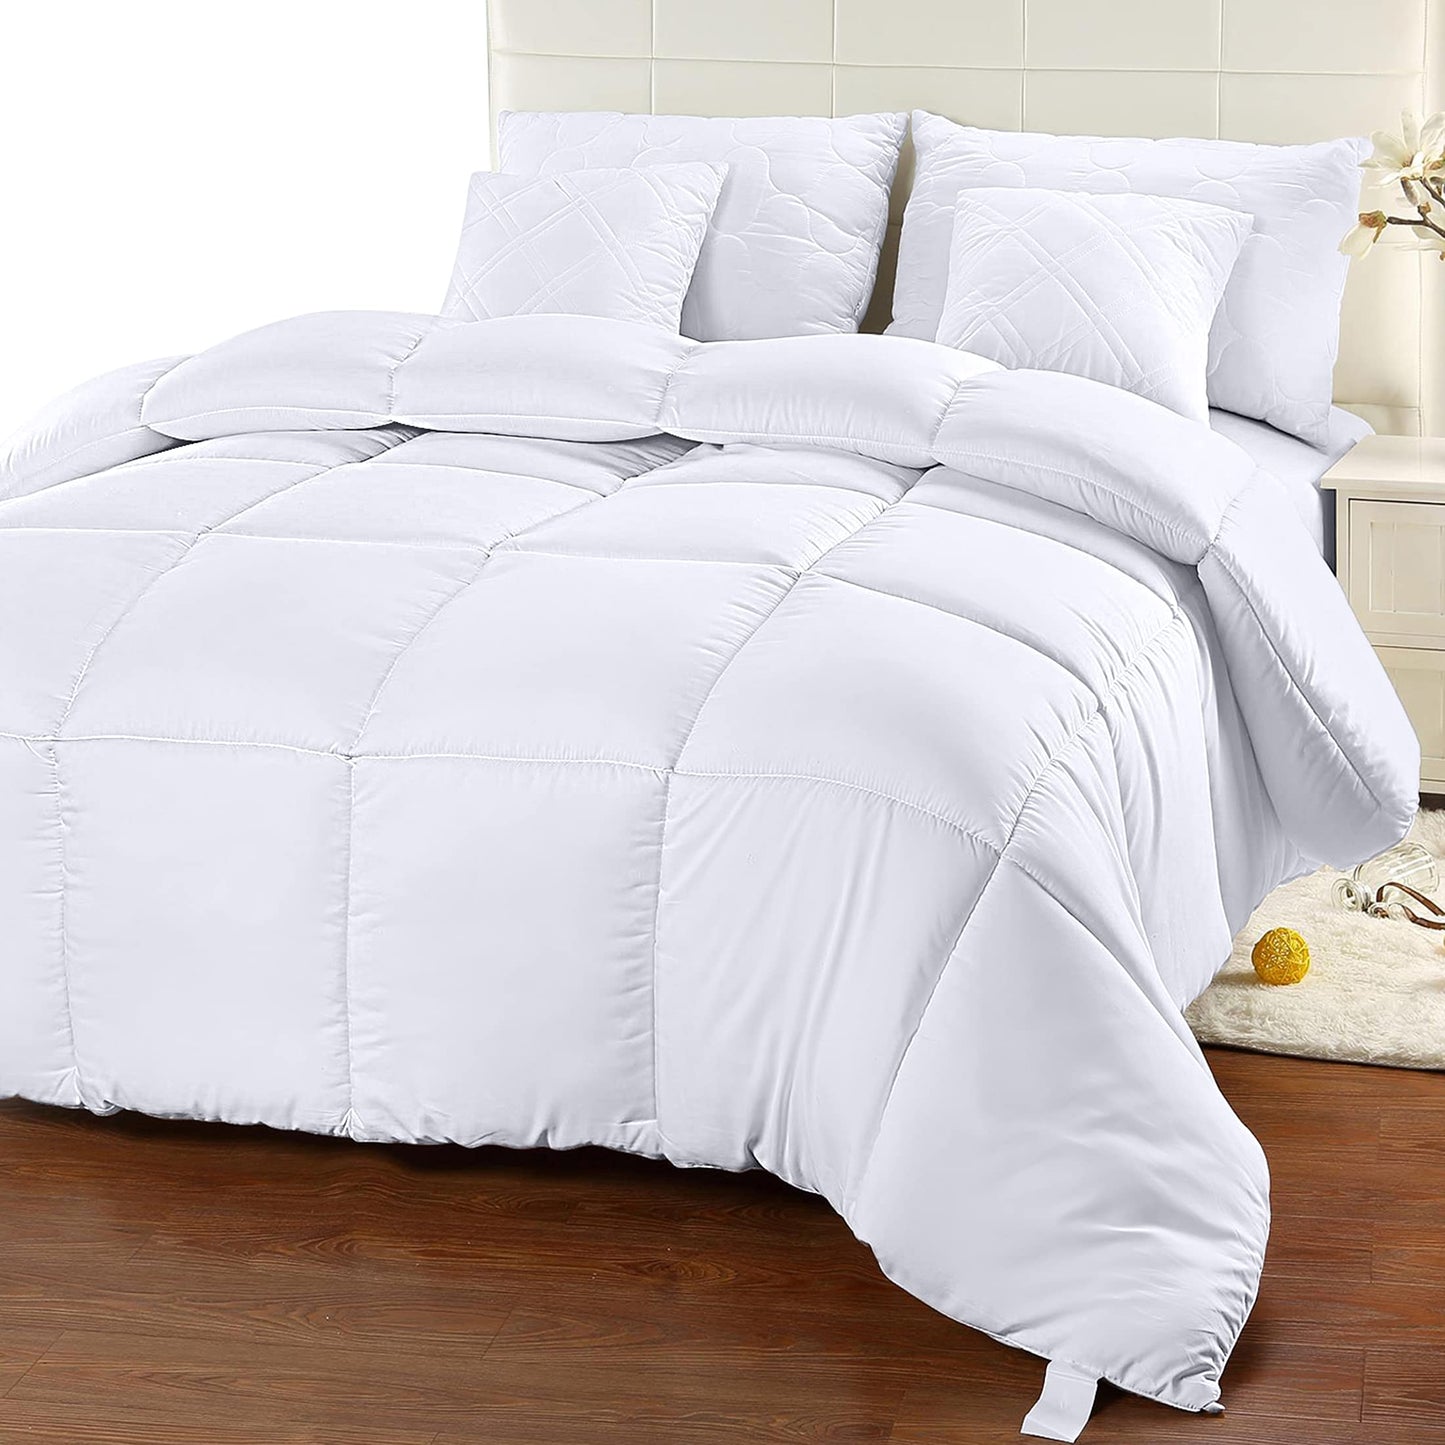 Utopia Bedding Twin XL Comforter Duvet Insert - Quilted Comforter with Corner Tabs - Box Stitched Down Alternative Comforter (Twin XL, White)